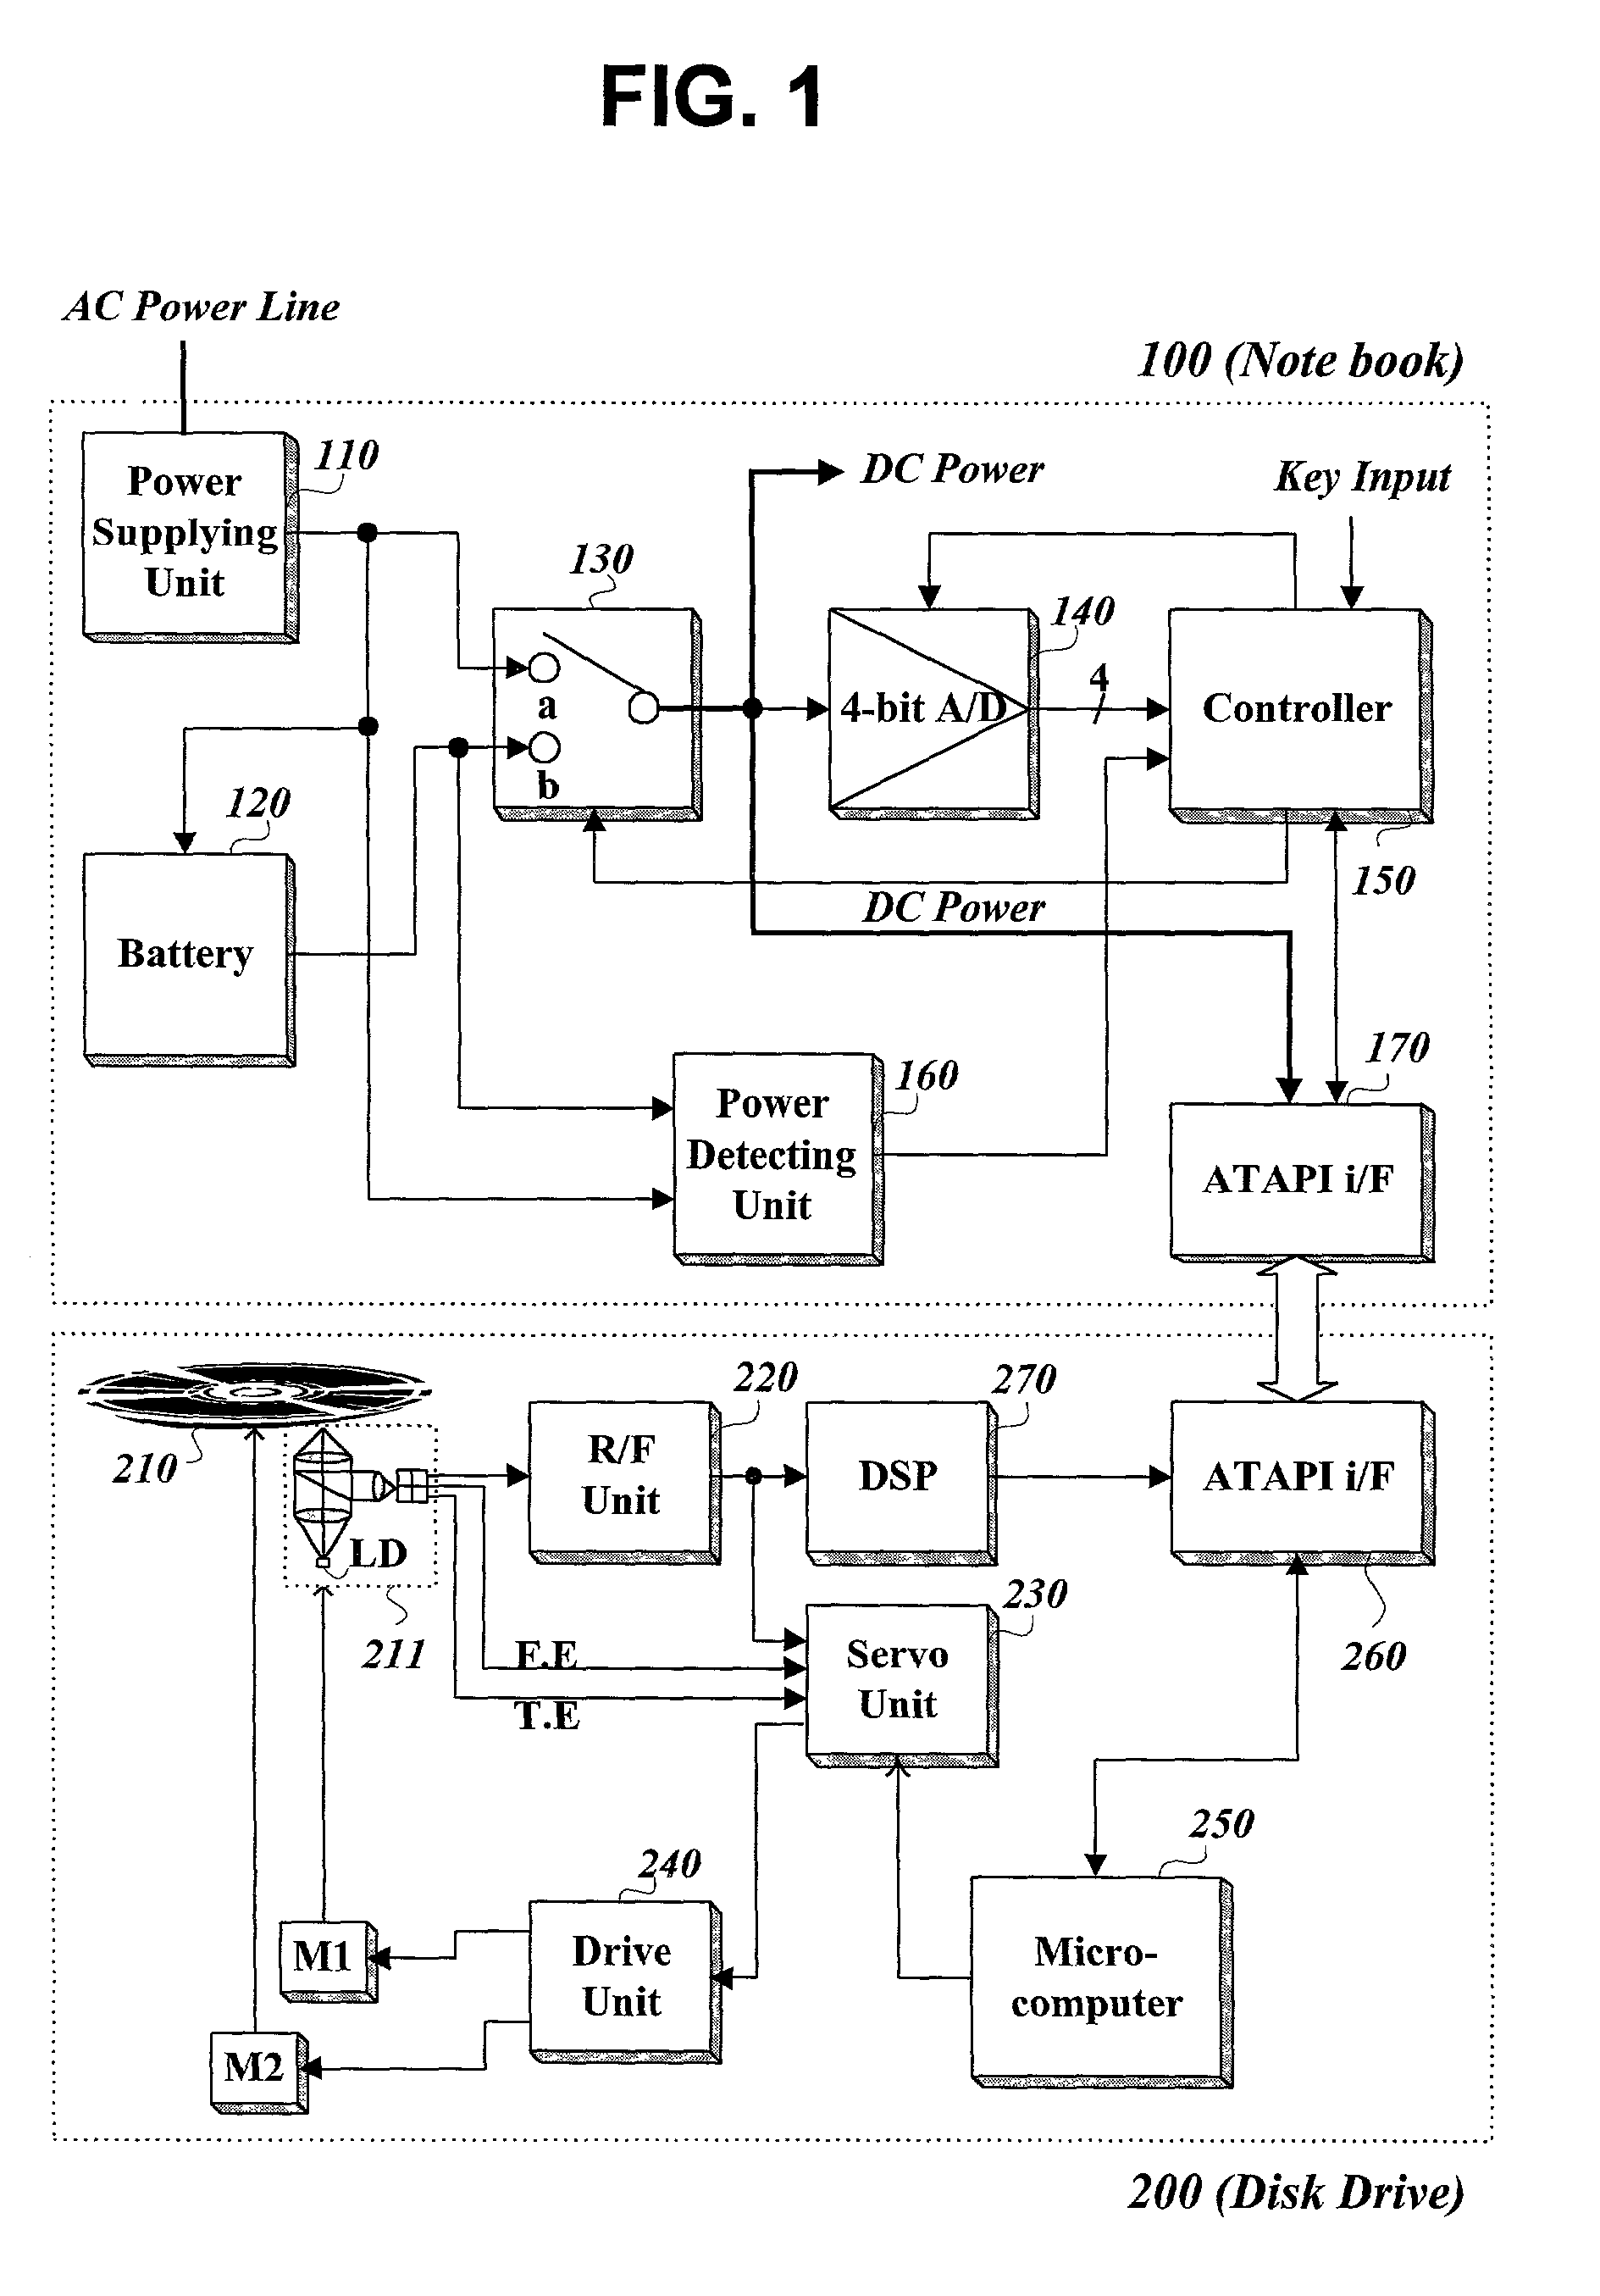 Method of controlling disk writing operation based on battery remaining capacity